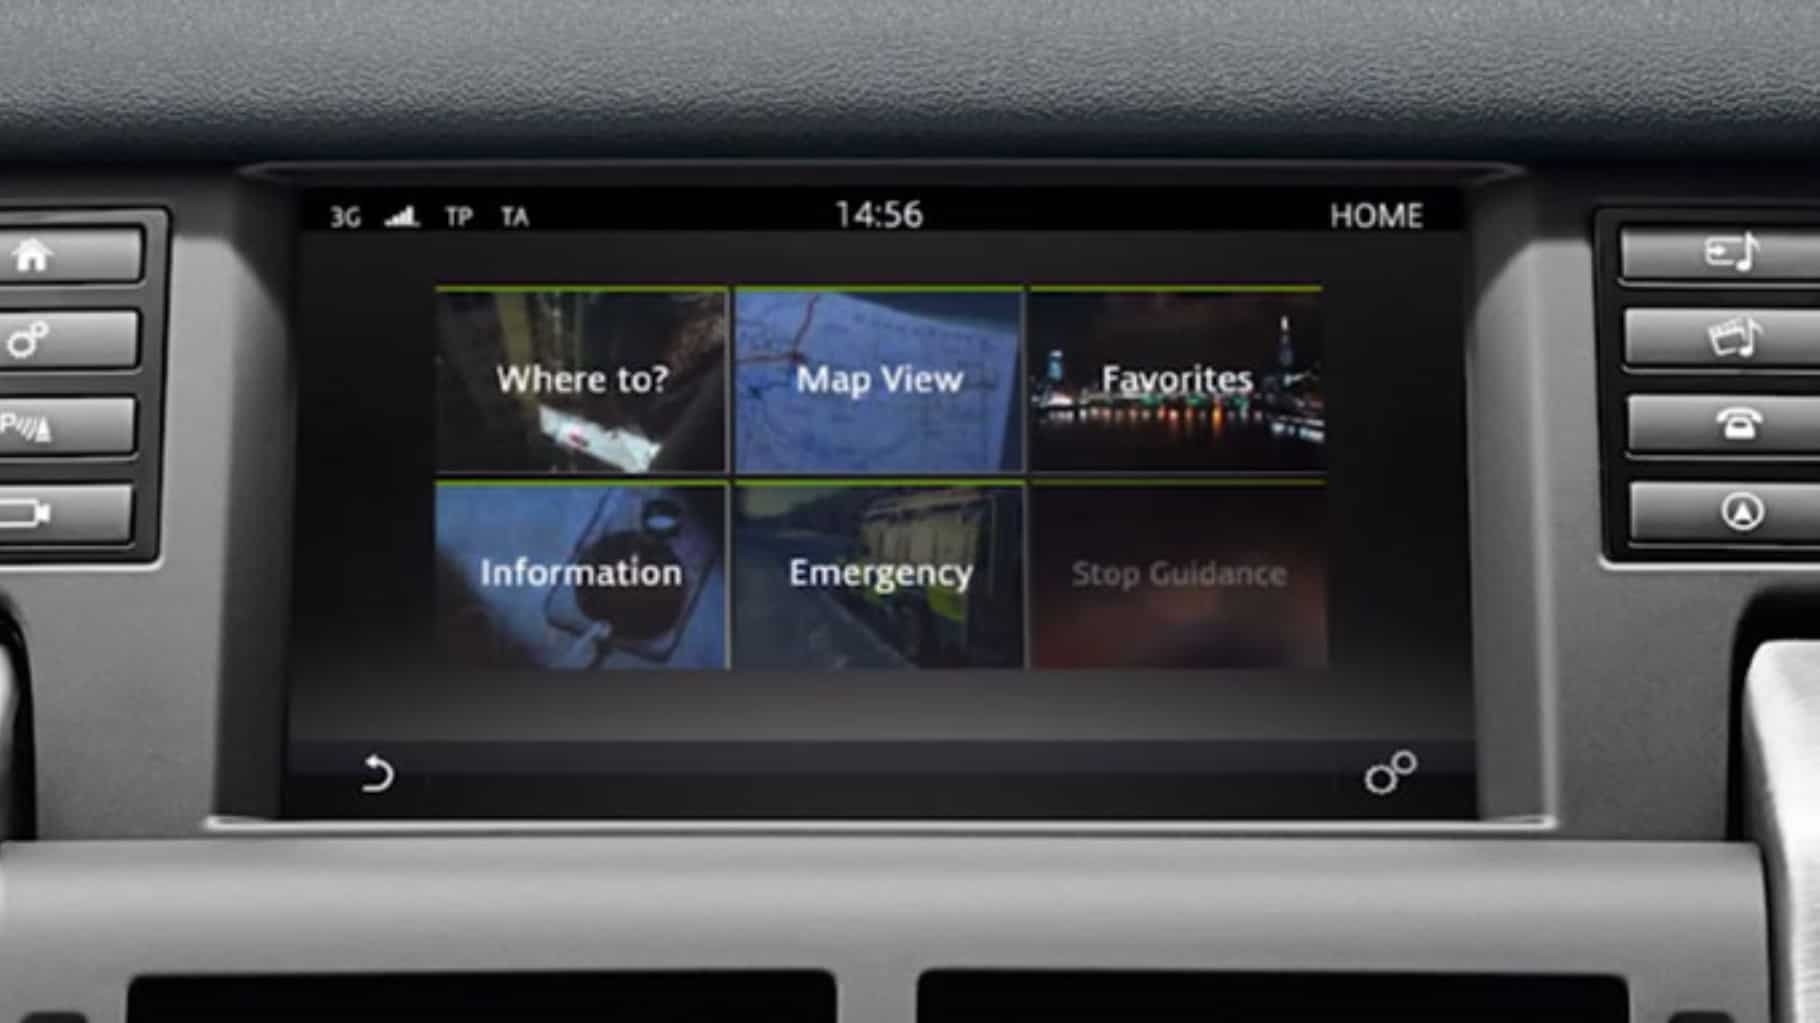 Discovery Sport InControl Touch: Entering a Destination